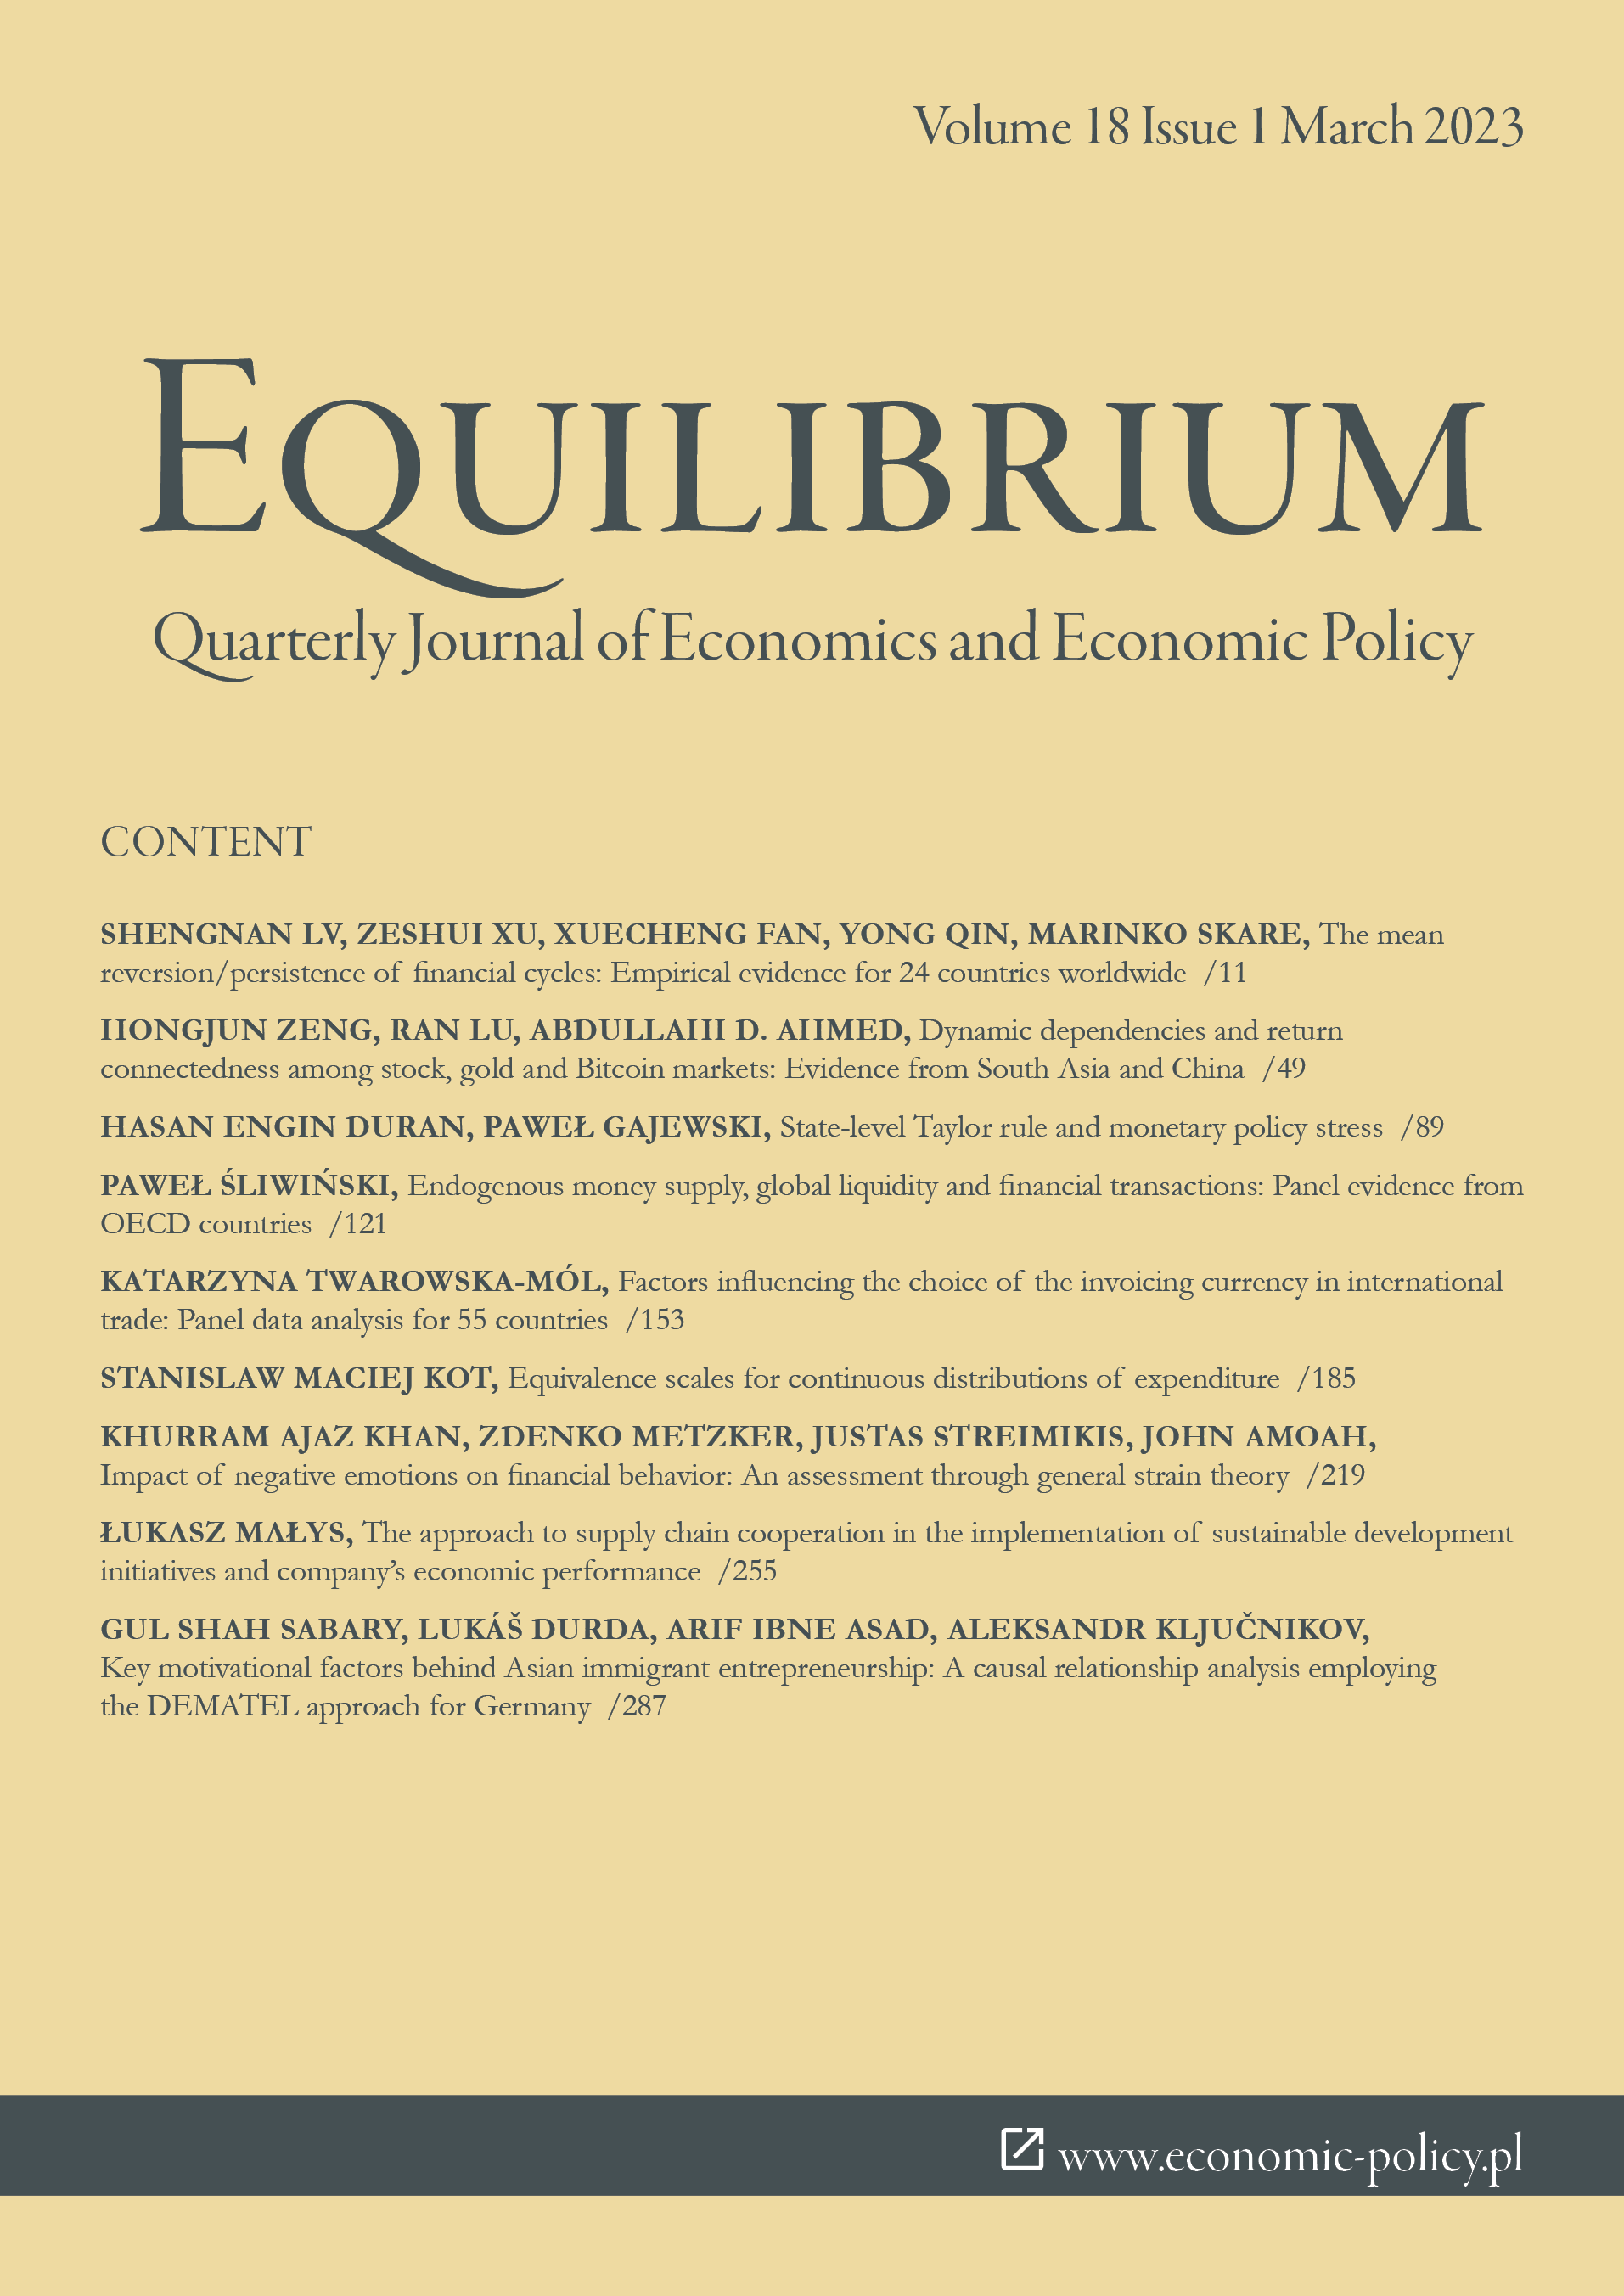 State-level Taylor rule and monetary policy stress